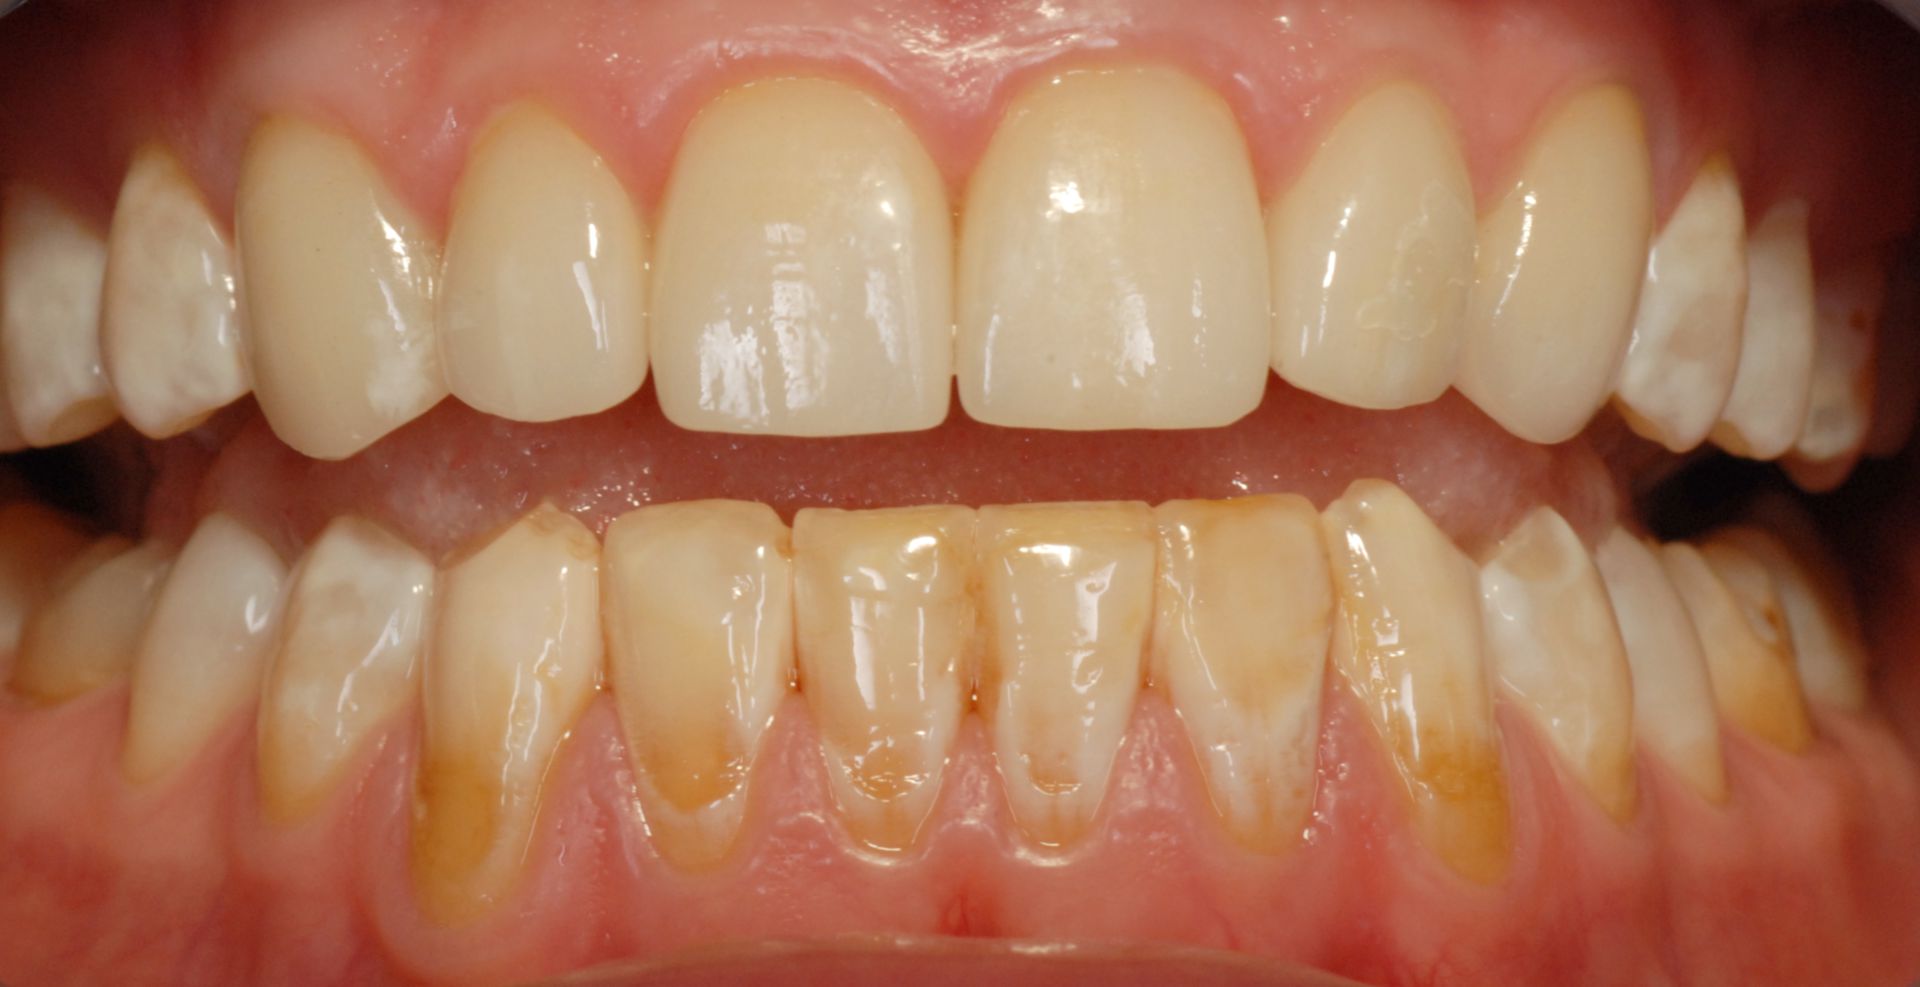 Fluorosis of the mandible